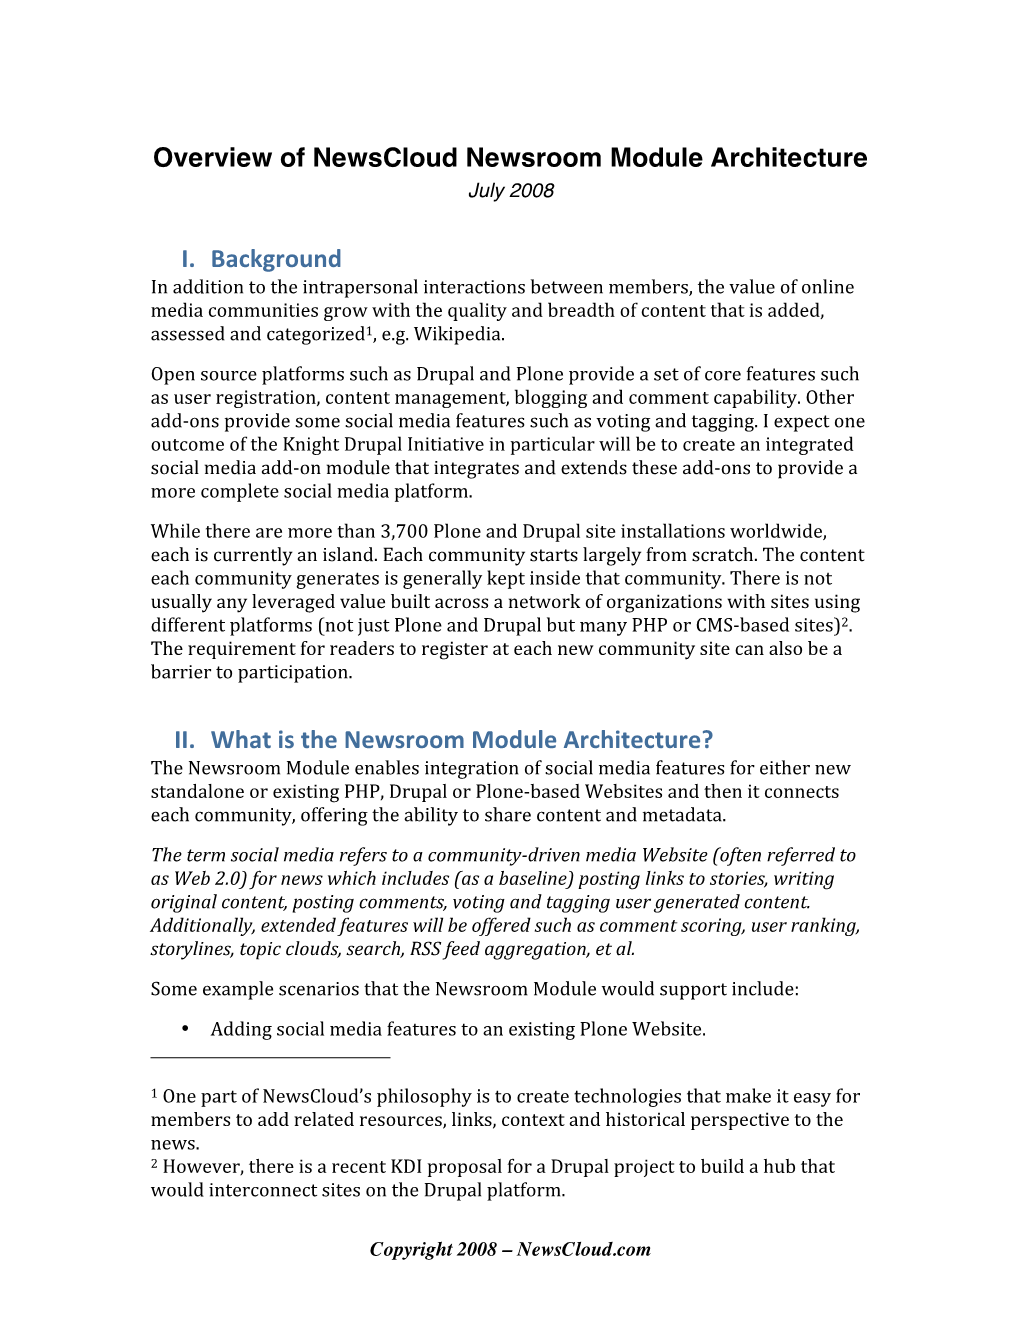 Overview of Newscloud Newsroom Module Architecture July 2008